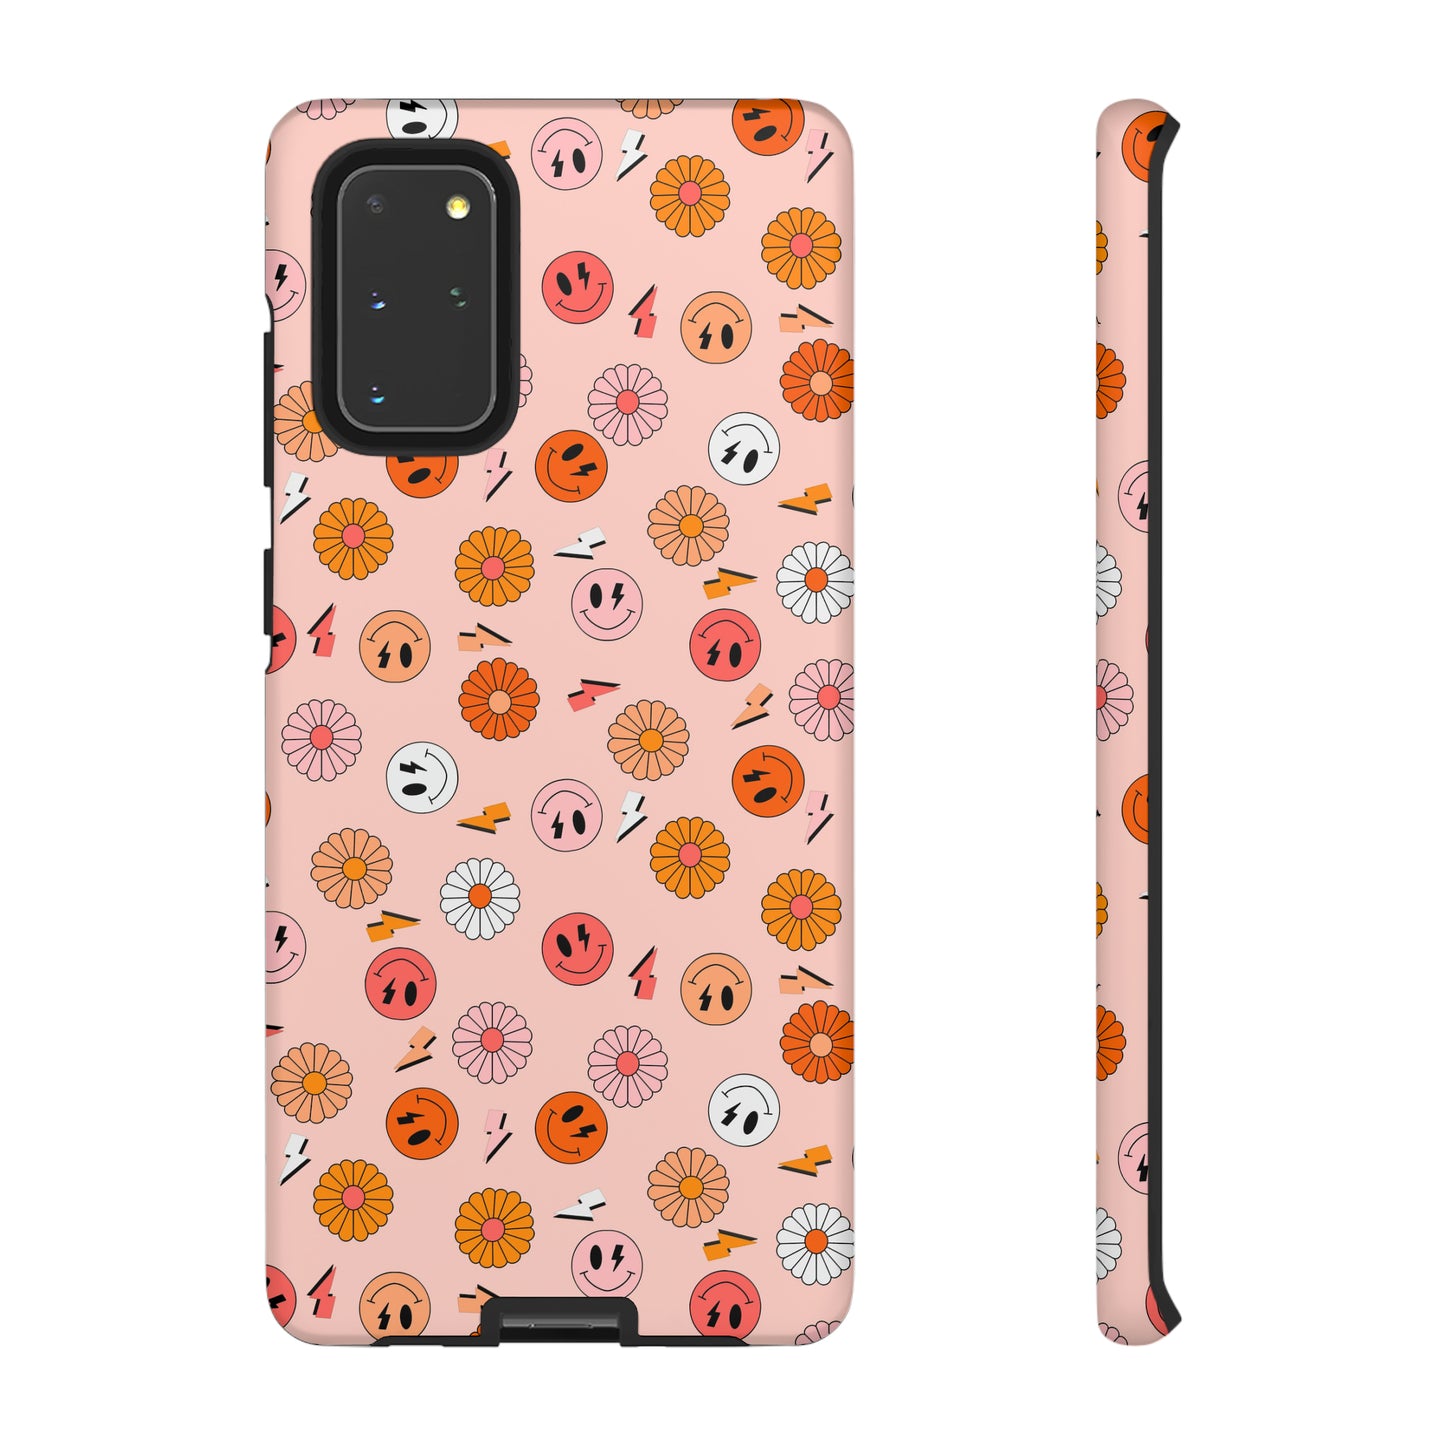 Groovy Tough Phone Case for Iphones, Samsungs, and Google phones